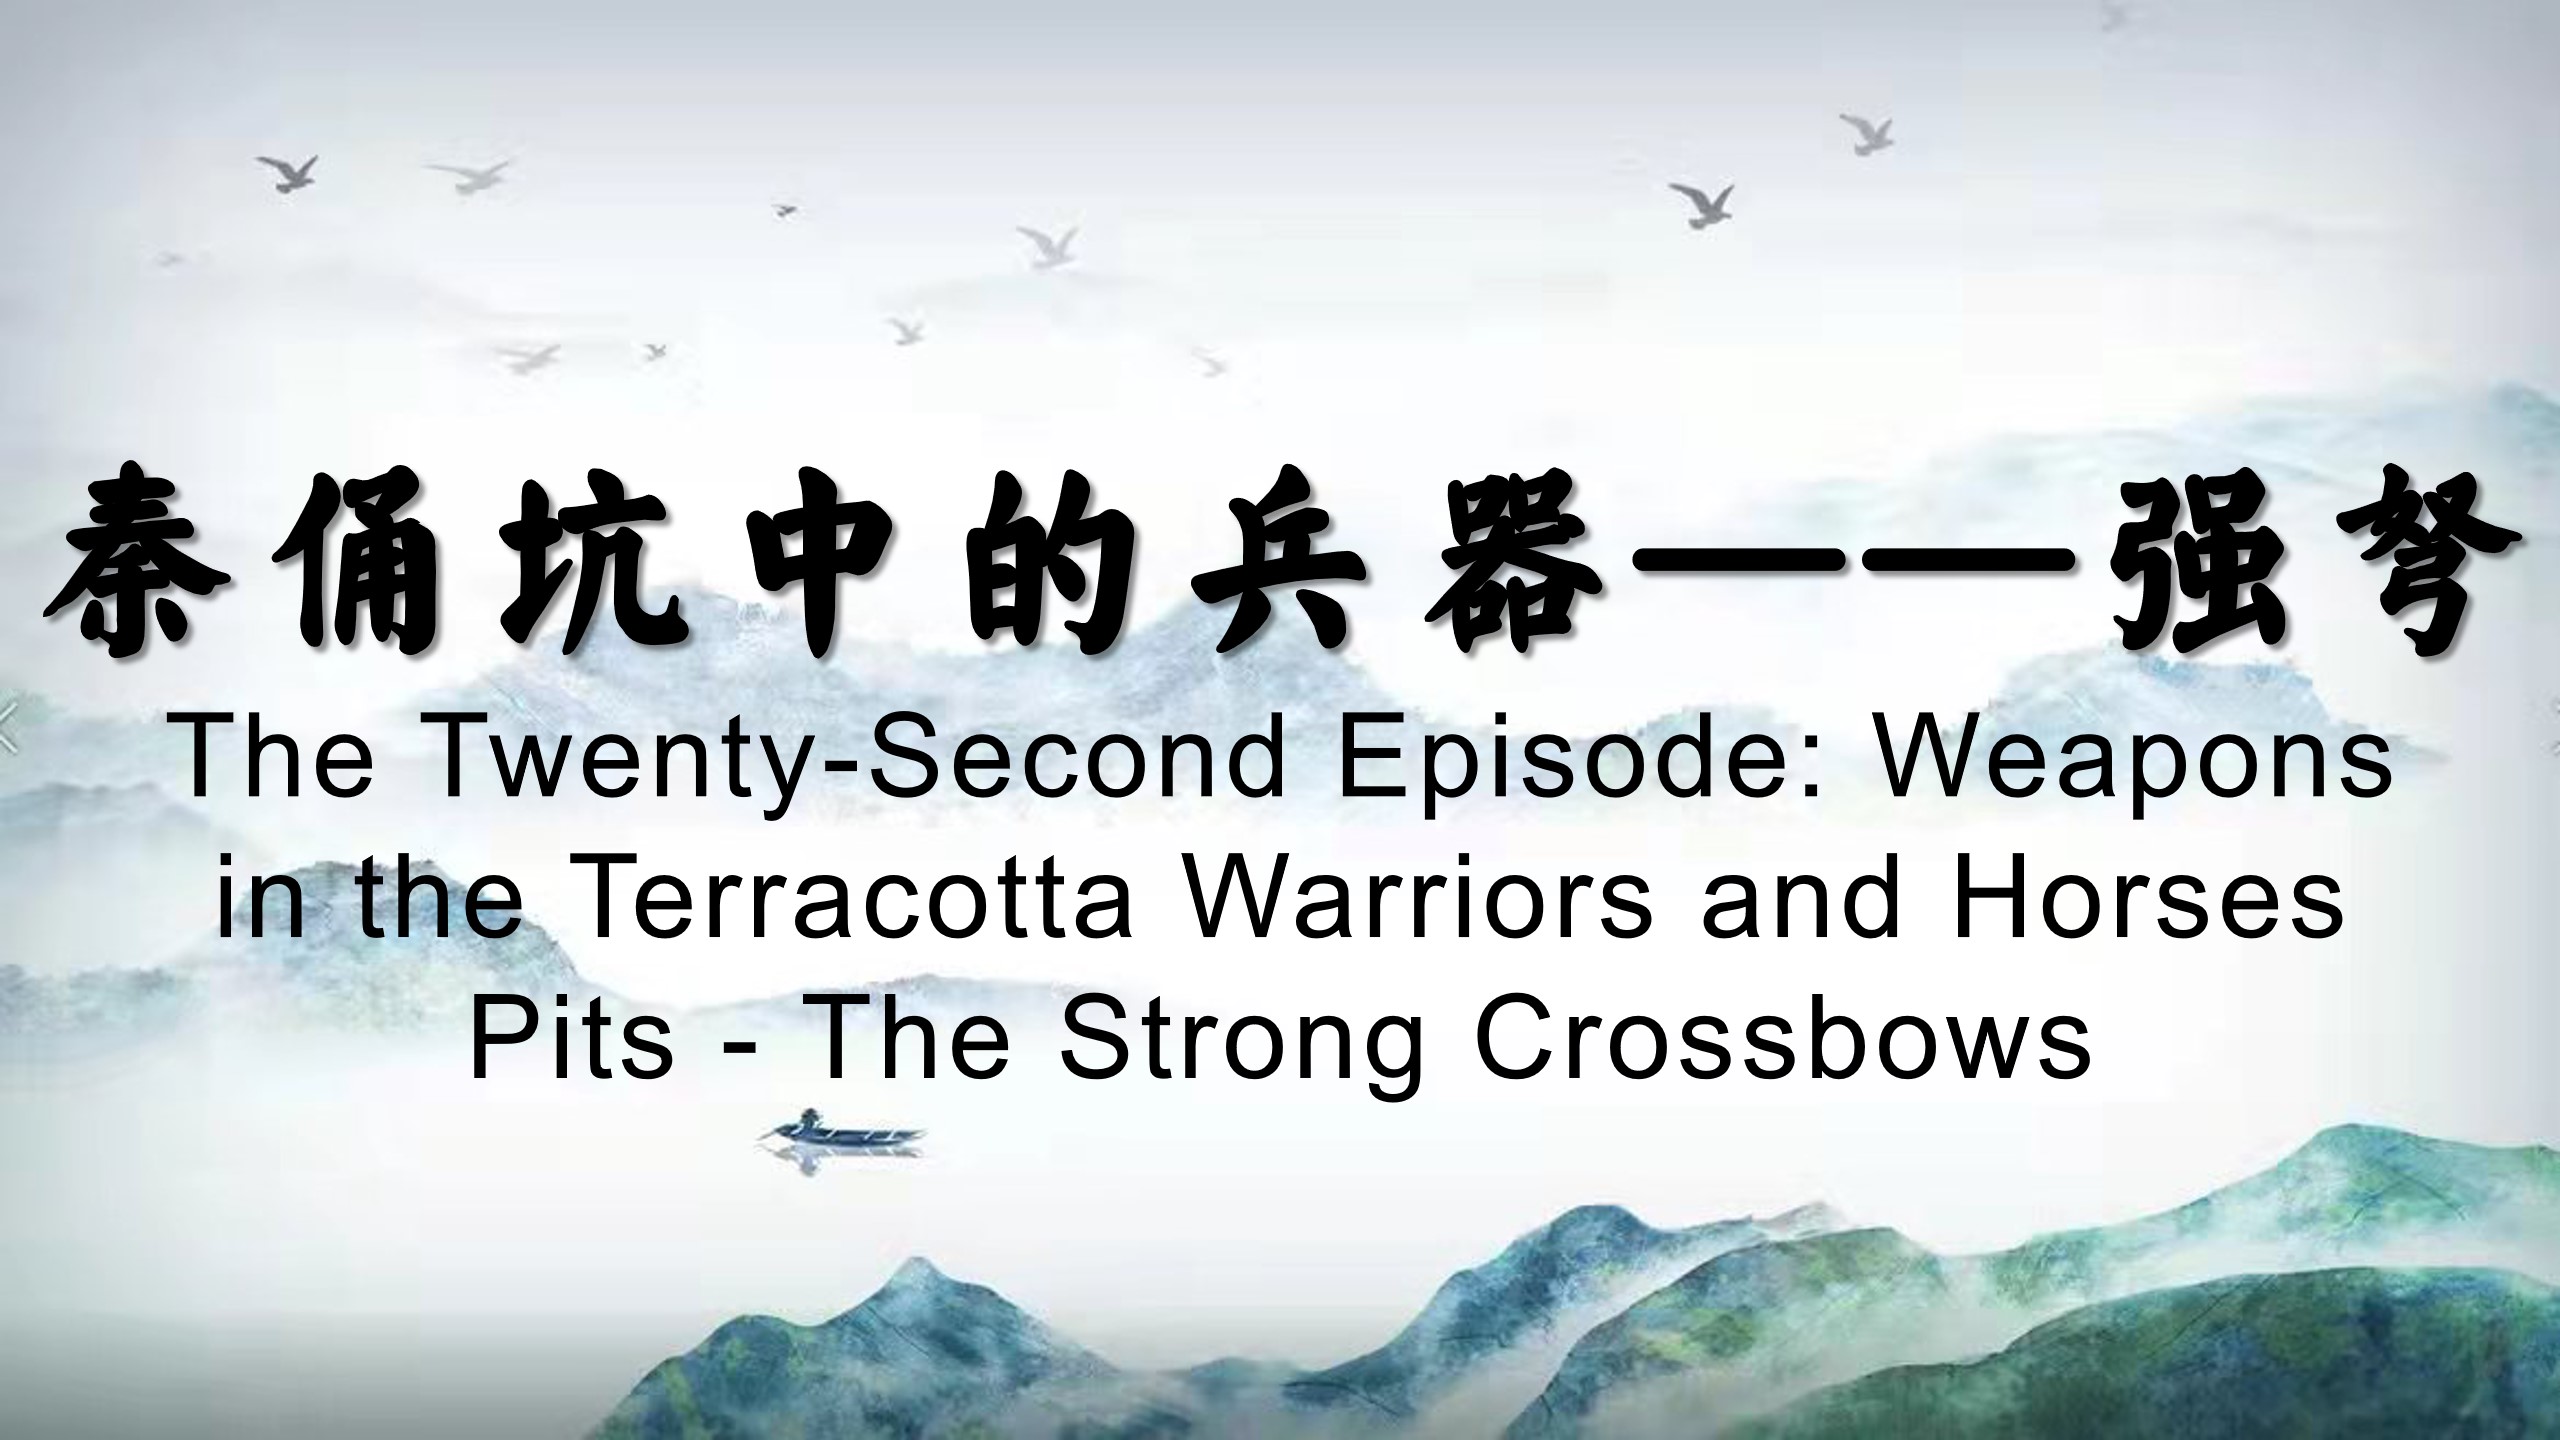 The Twenty-Second Episode: Weapons in the Terracotta Warriors and Horses Pits - The Strong Crossbows